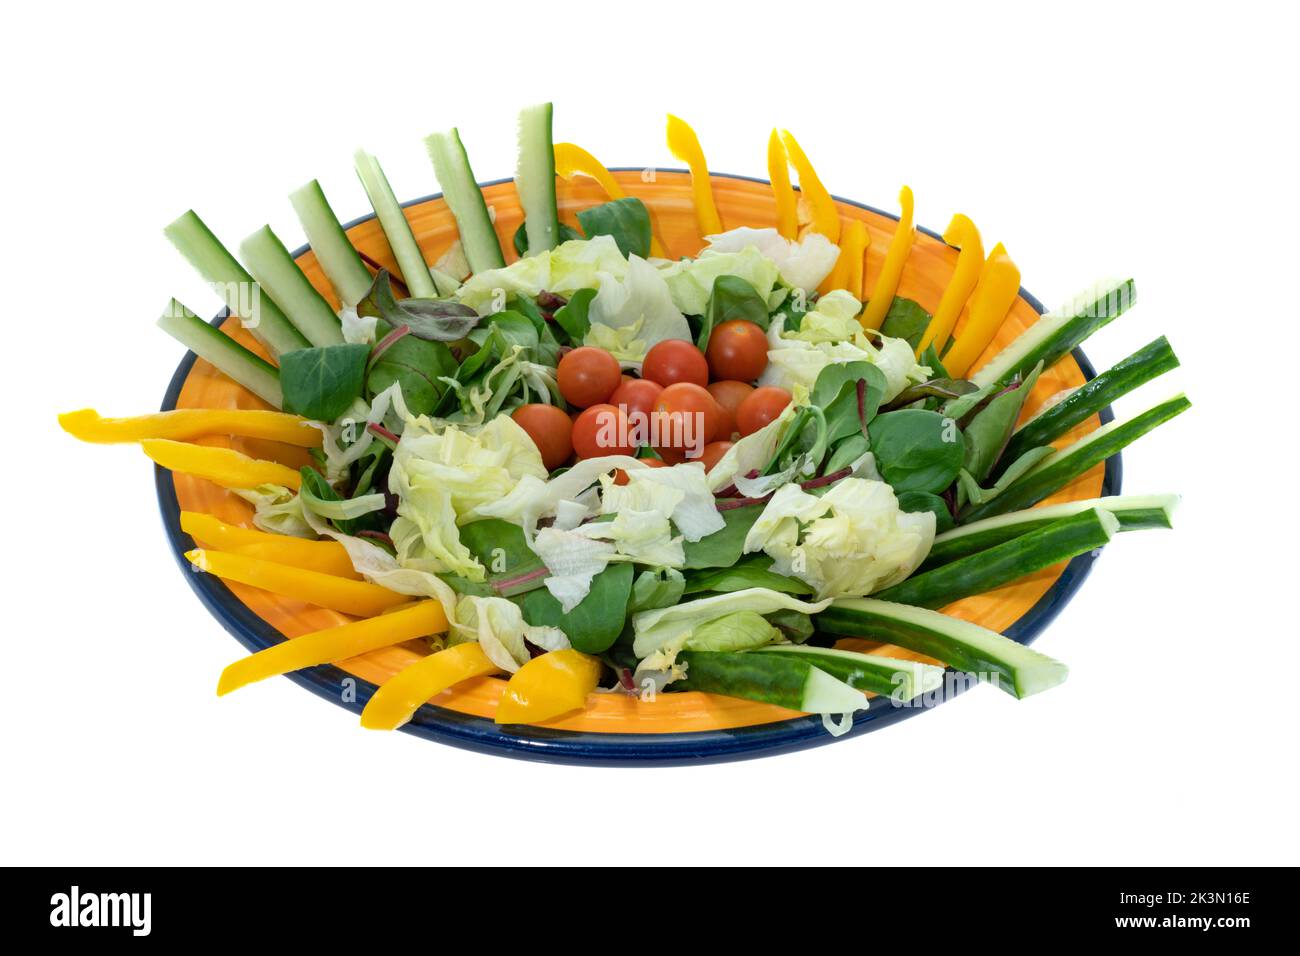 A salad bowl with a white background Stock Photo